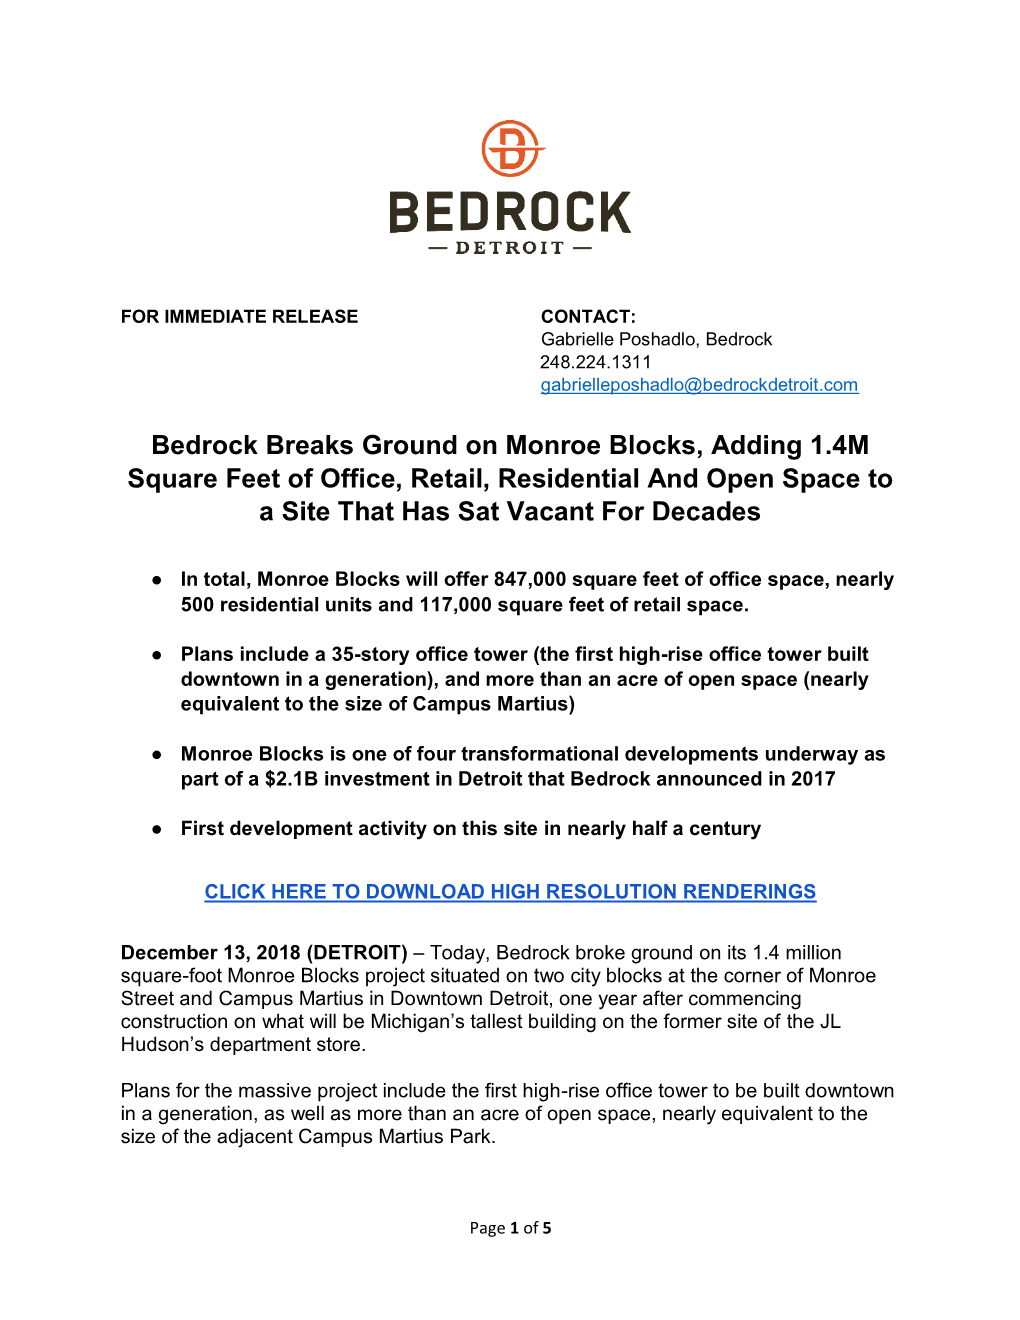 Bedrock Breaks Ground on Monroe Blocks, Adding 1.4M Square Feet of Office, Retail, Residential and Open Space to a Site That Has Sat Vacant for Decades